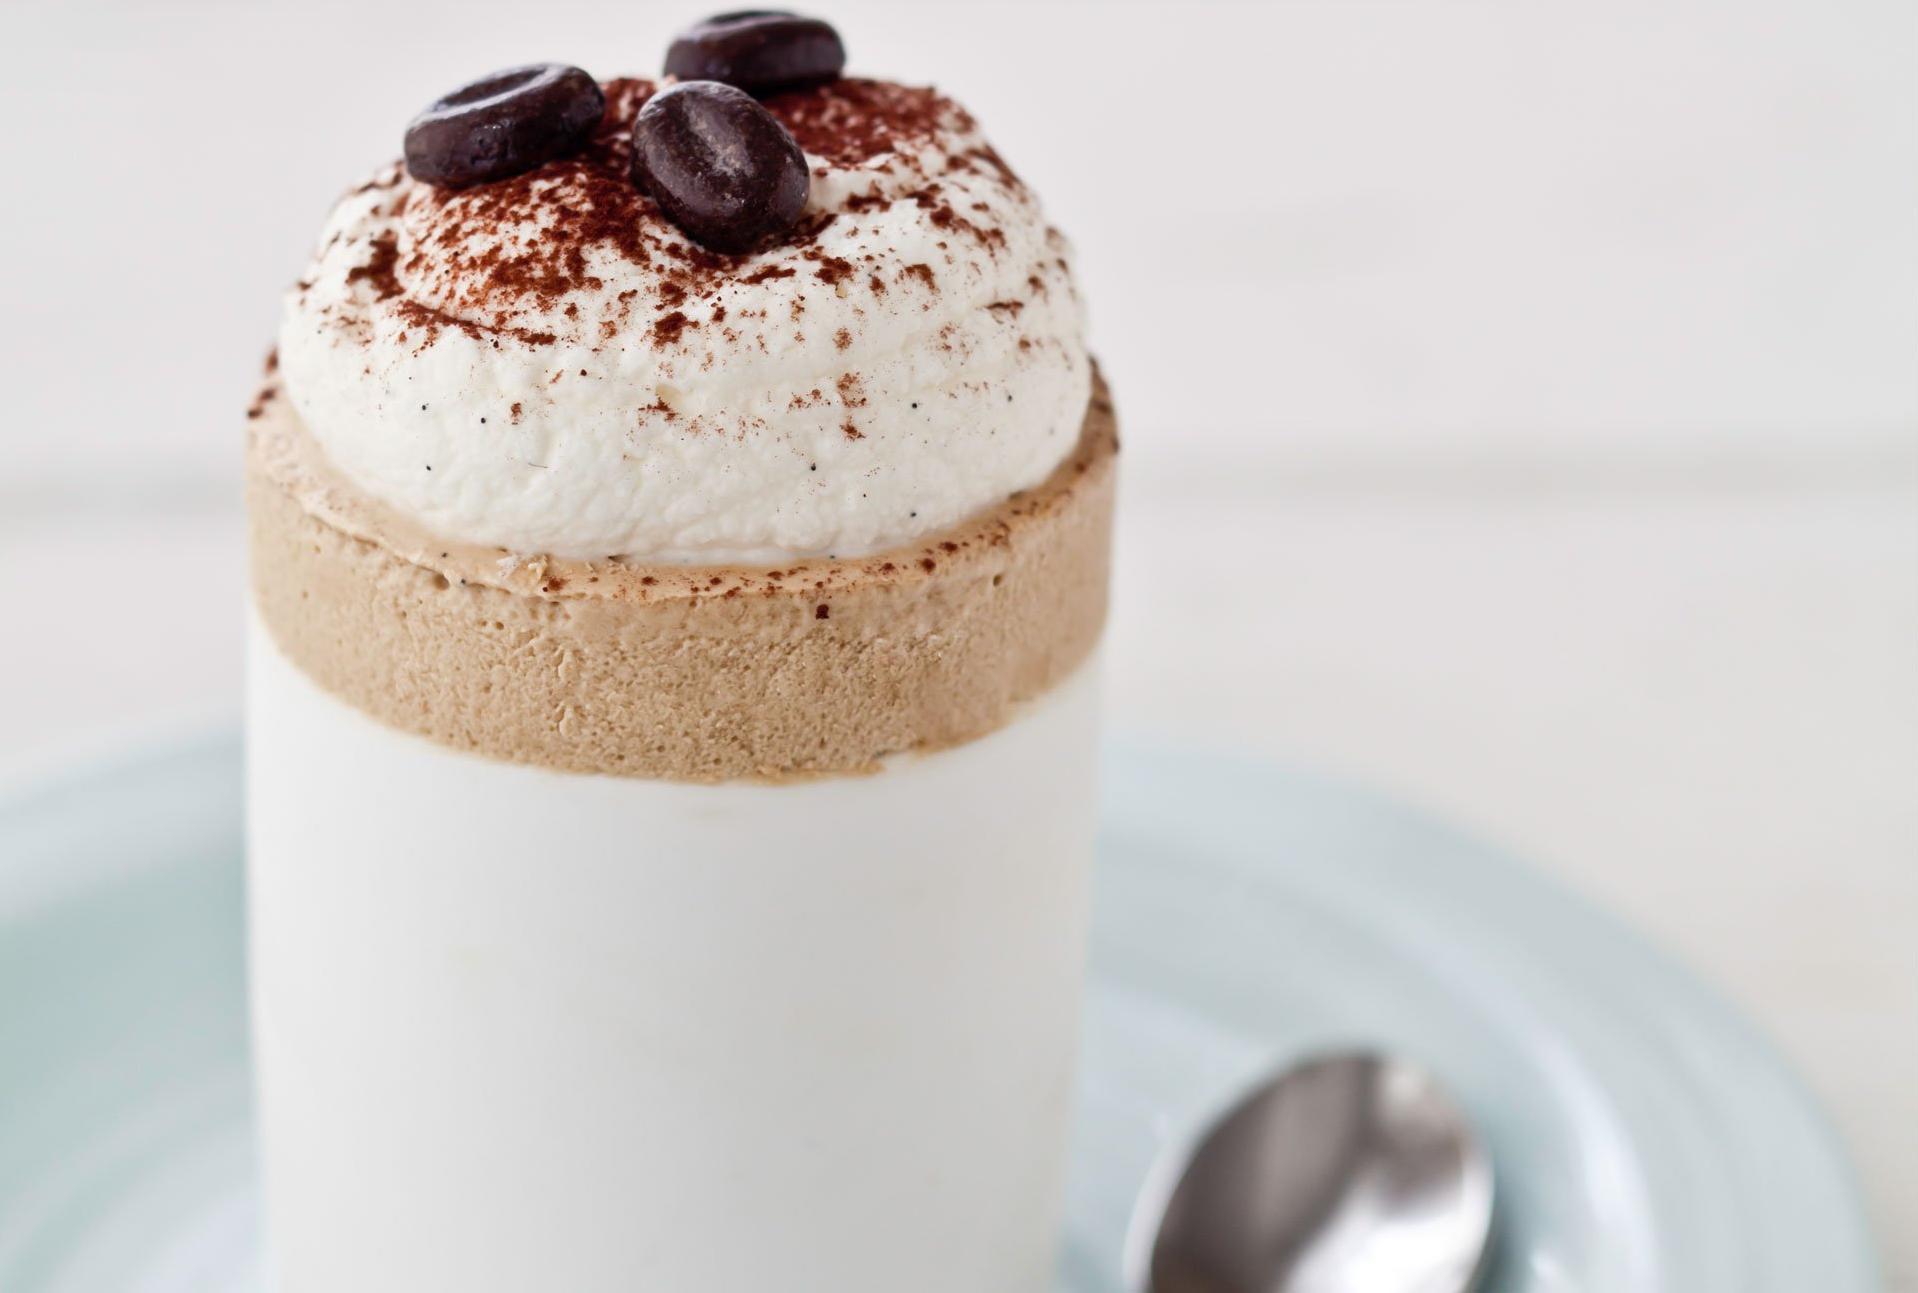  Impress your guests with this gorgeous dessert masterpiece.